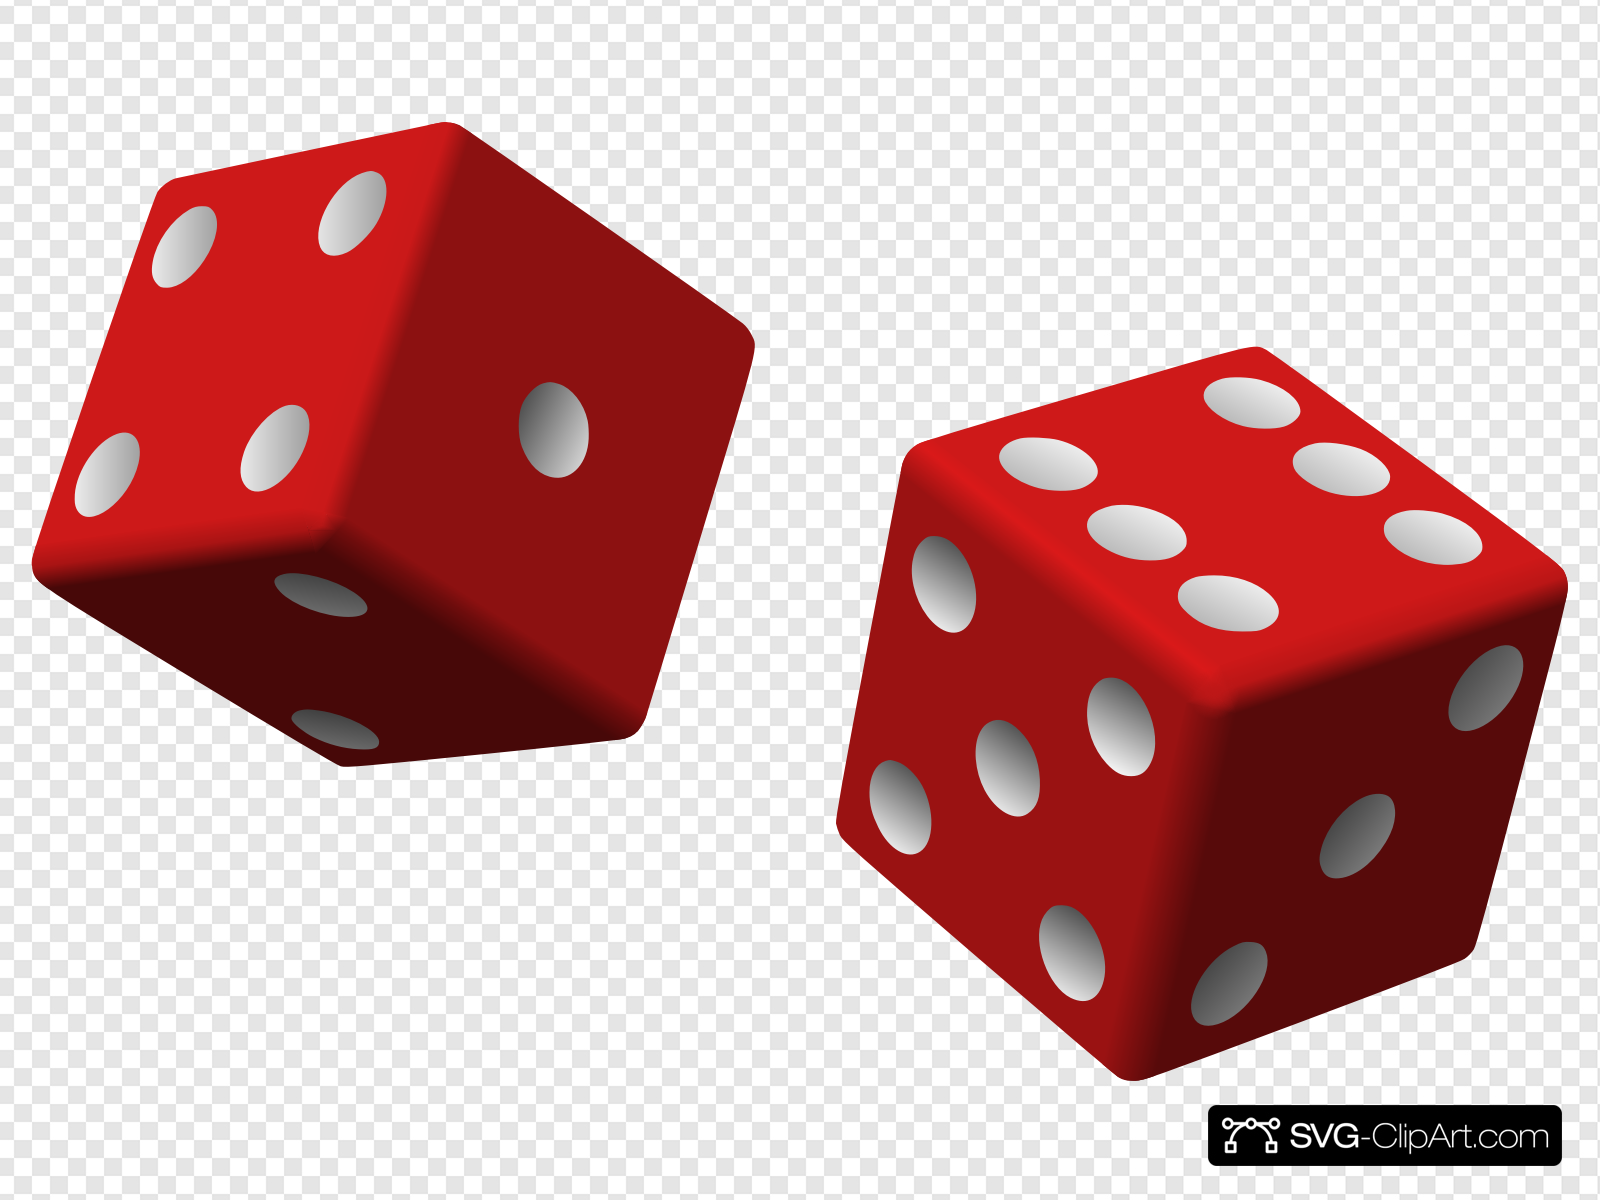 Two Red Dice Clip art, Icon and SVG.